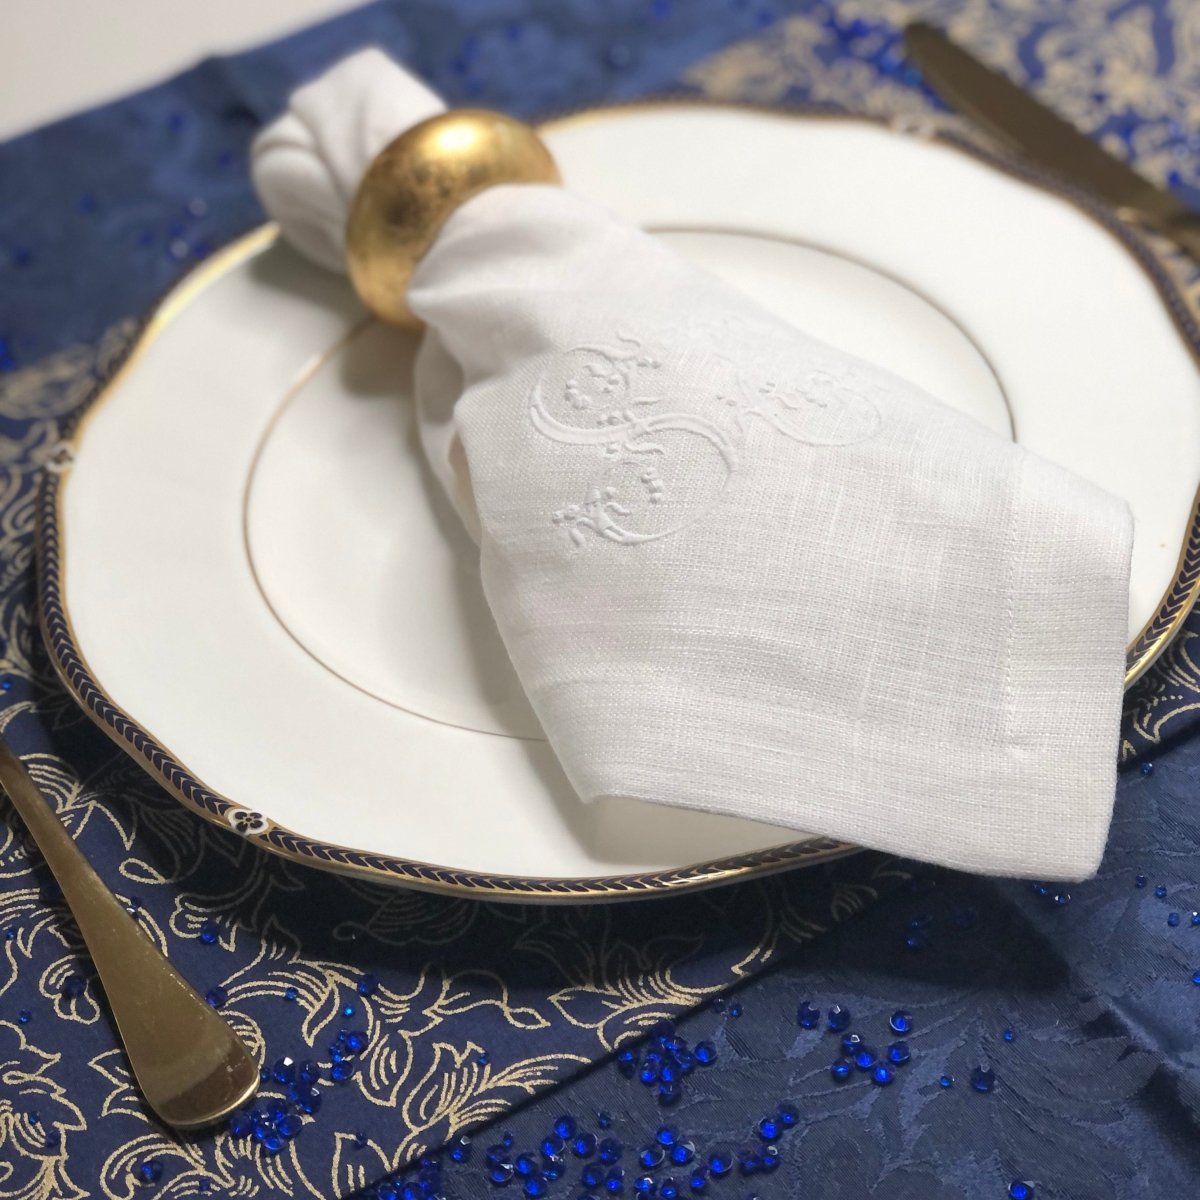 100% White Linen Napkins with Embroidered French Monogram with matt Egyptian Thread - Linen and Letters